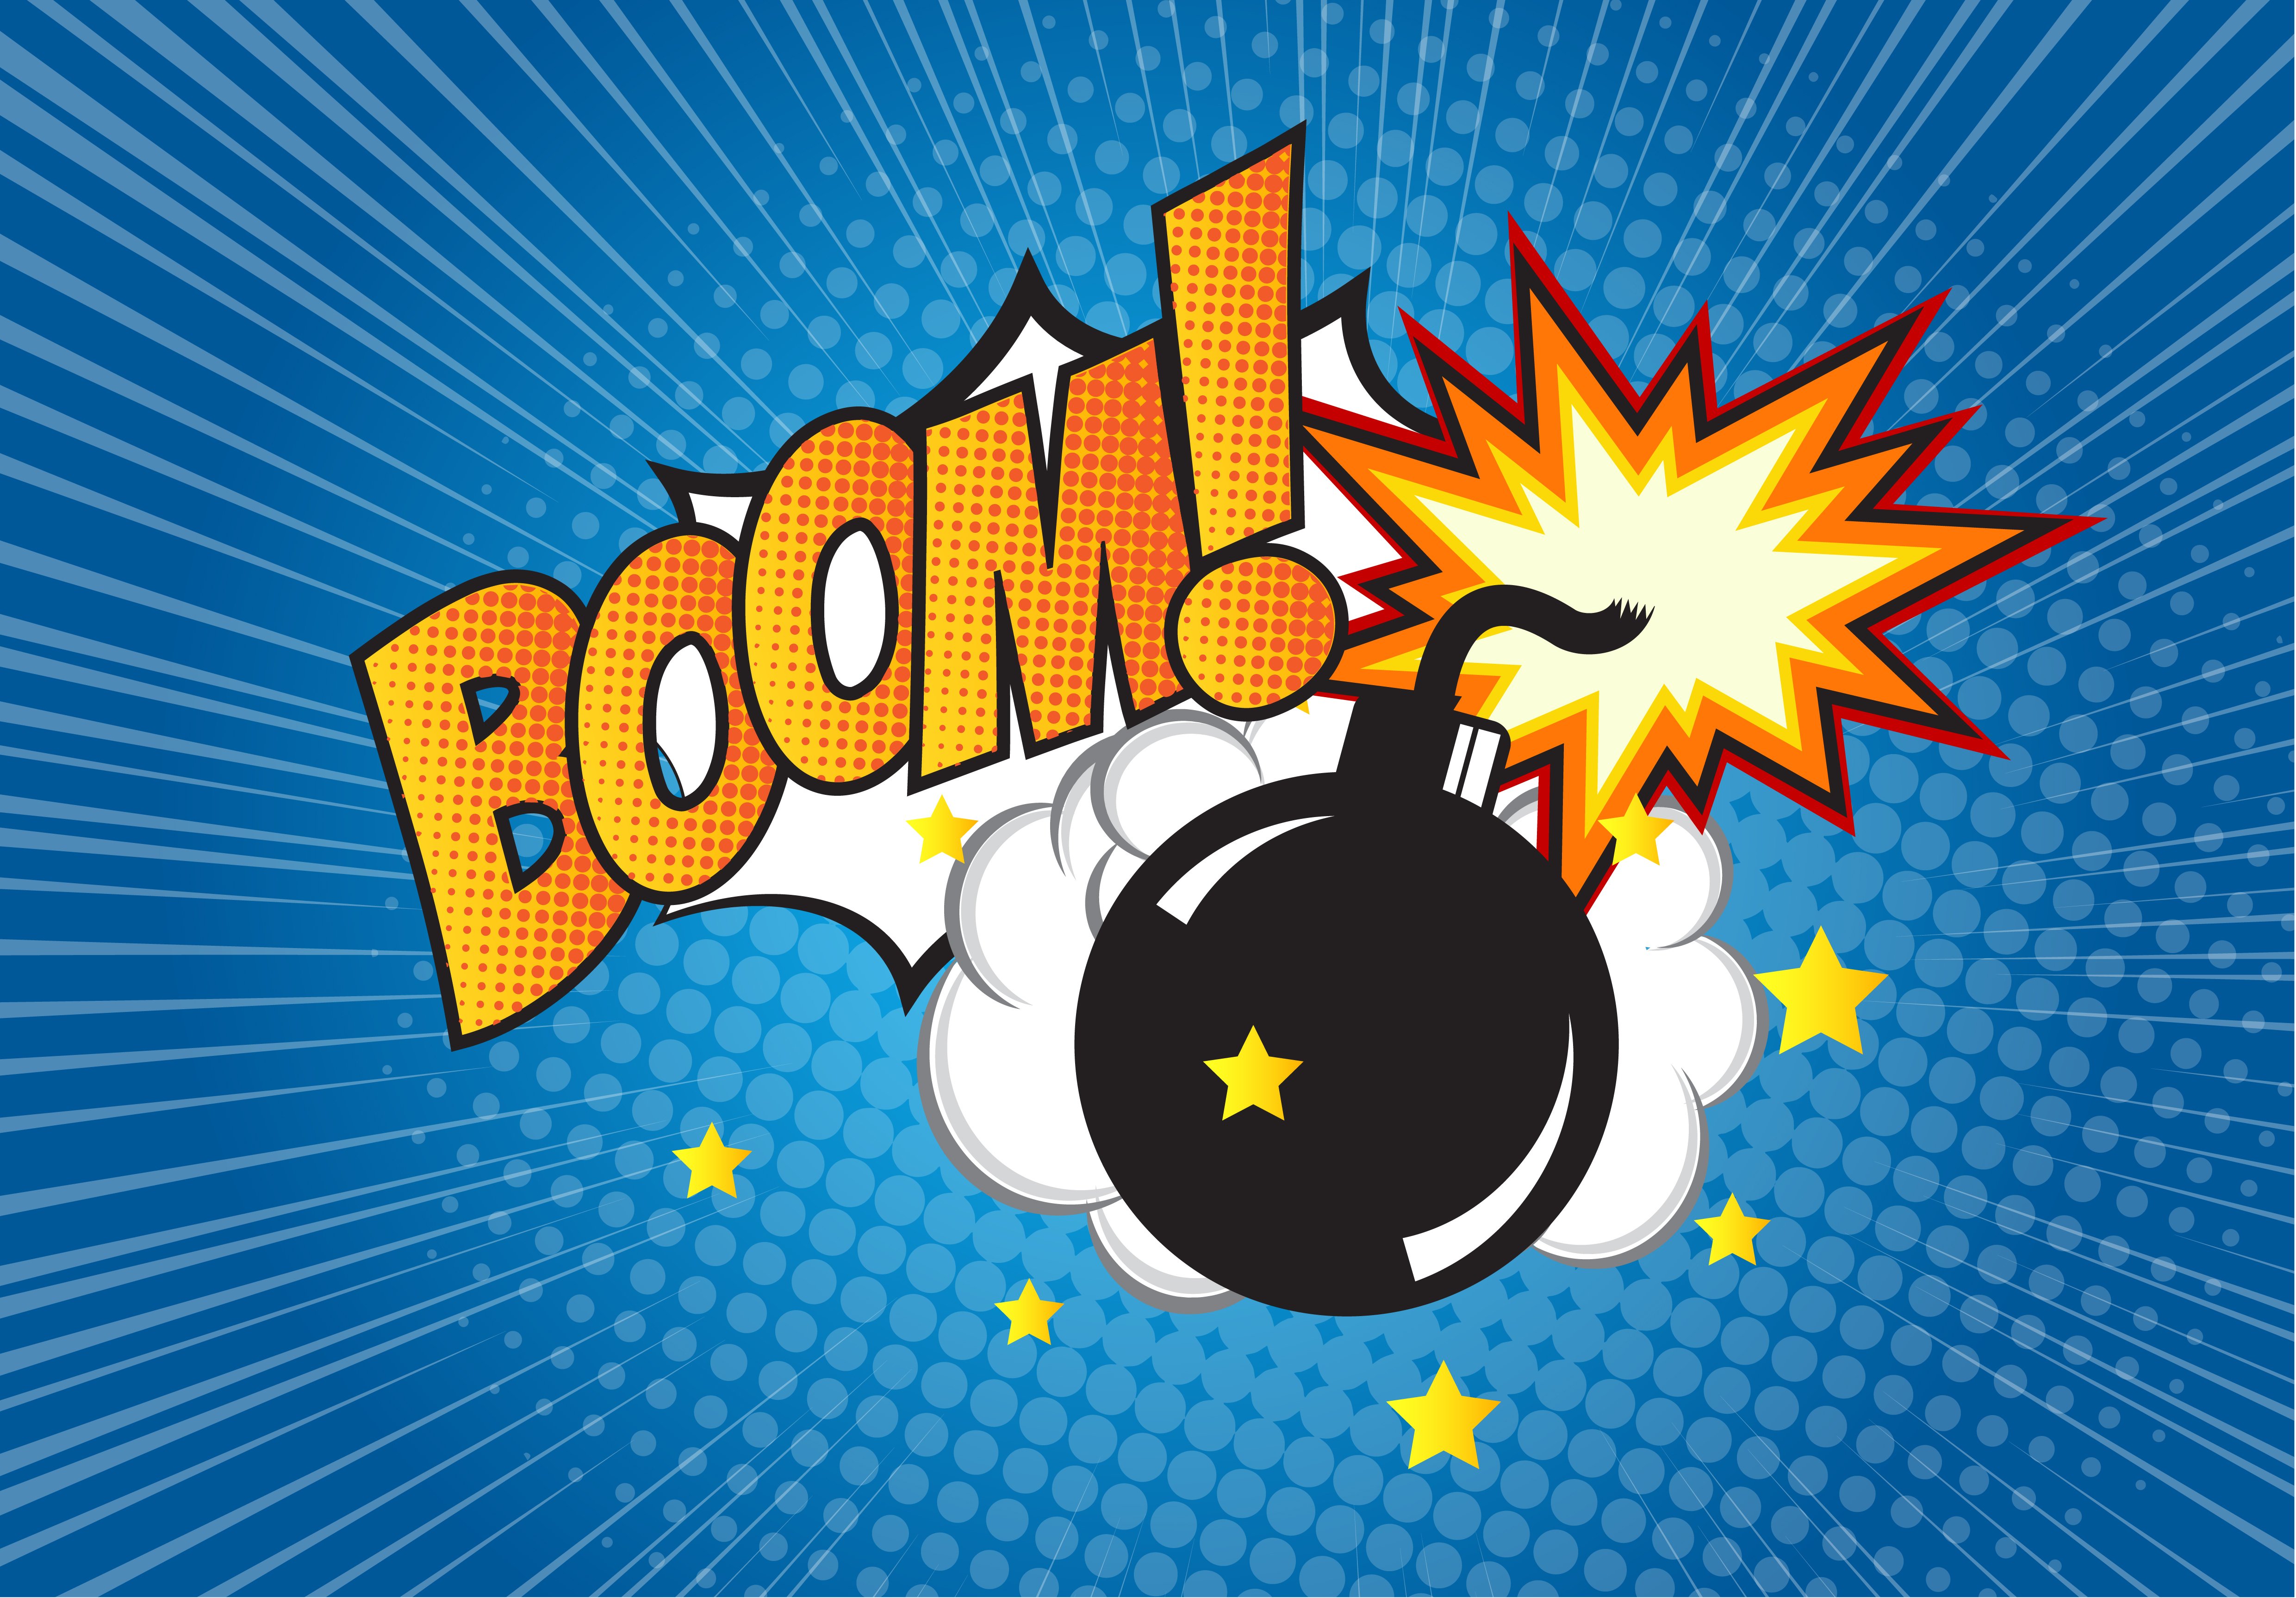 HD desktop wallpaper featuring a vibrant pop art explosion with 'BOOM!' text, stars, and a comic style bomb on a dotted blue background.